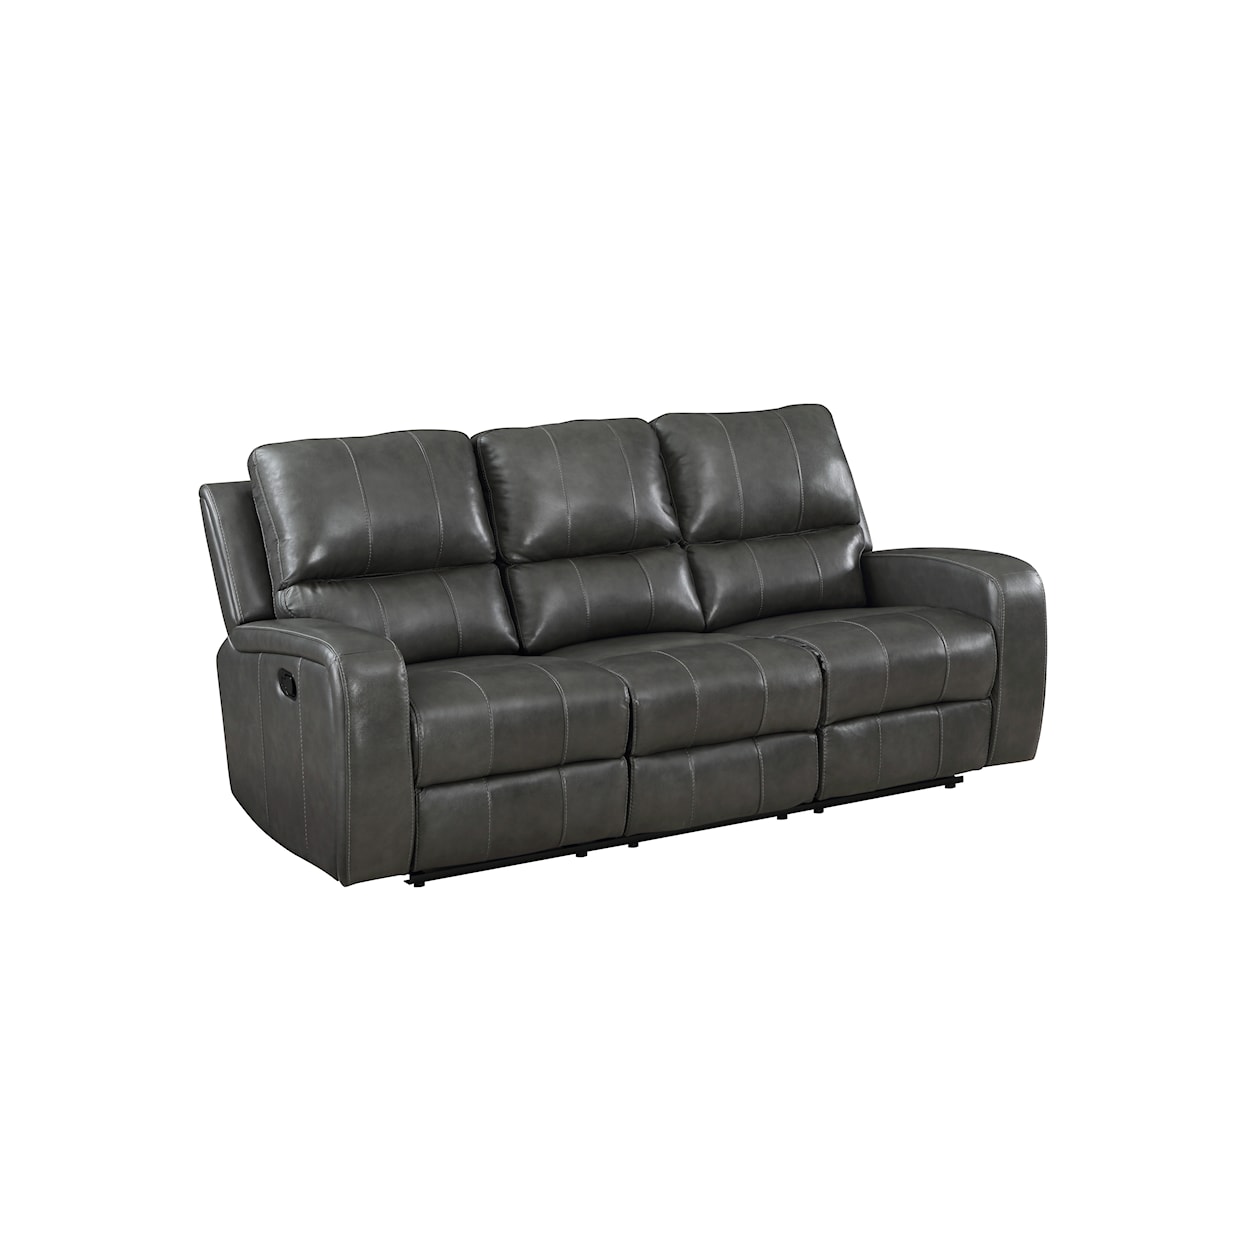 New Classic Linton Leather Sofa W/ Power Footrest